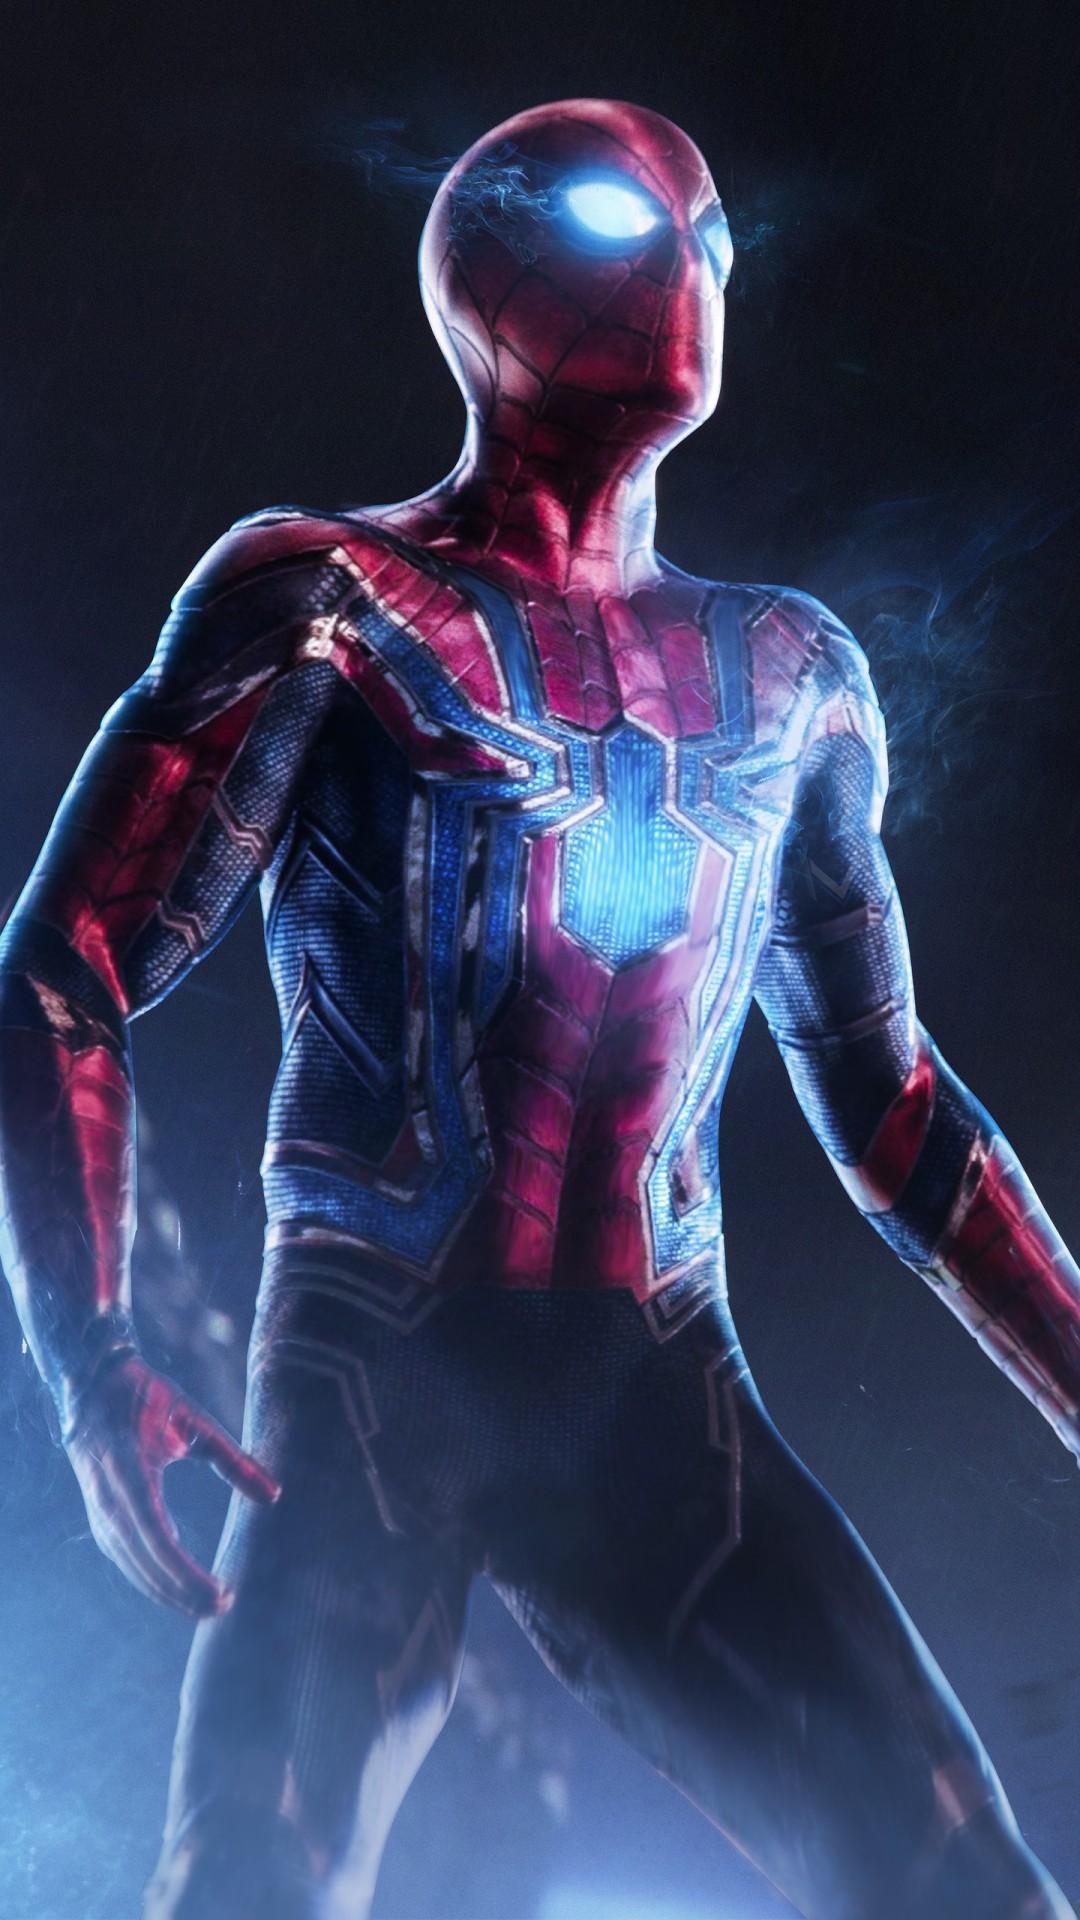 Spiderman HD Wallpaper For Android, Free Stock Wallpaper